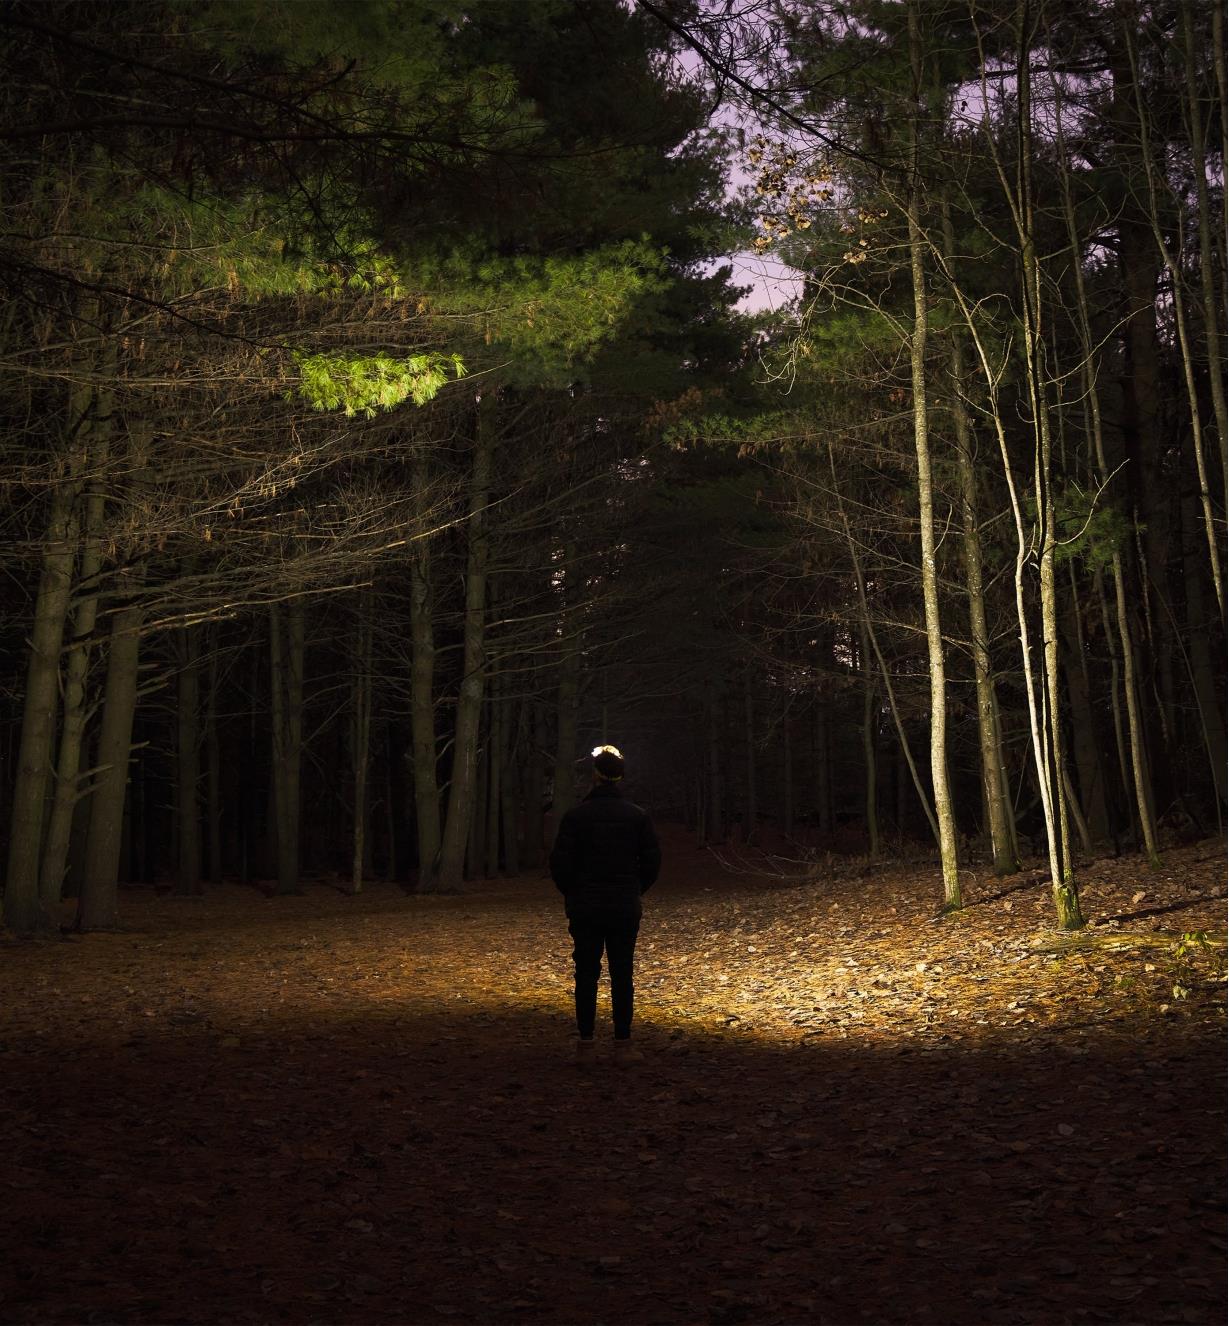 A person uses the COB headlamp’s LED strip to help see the trail while walking in woods at night